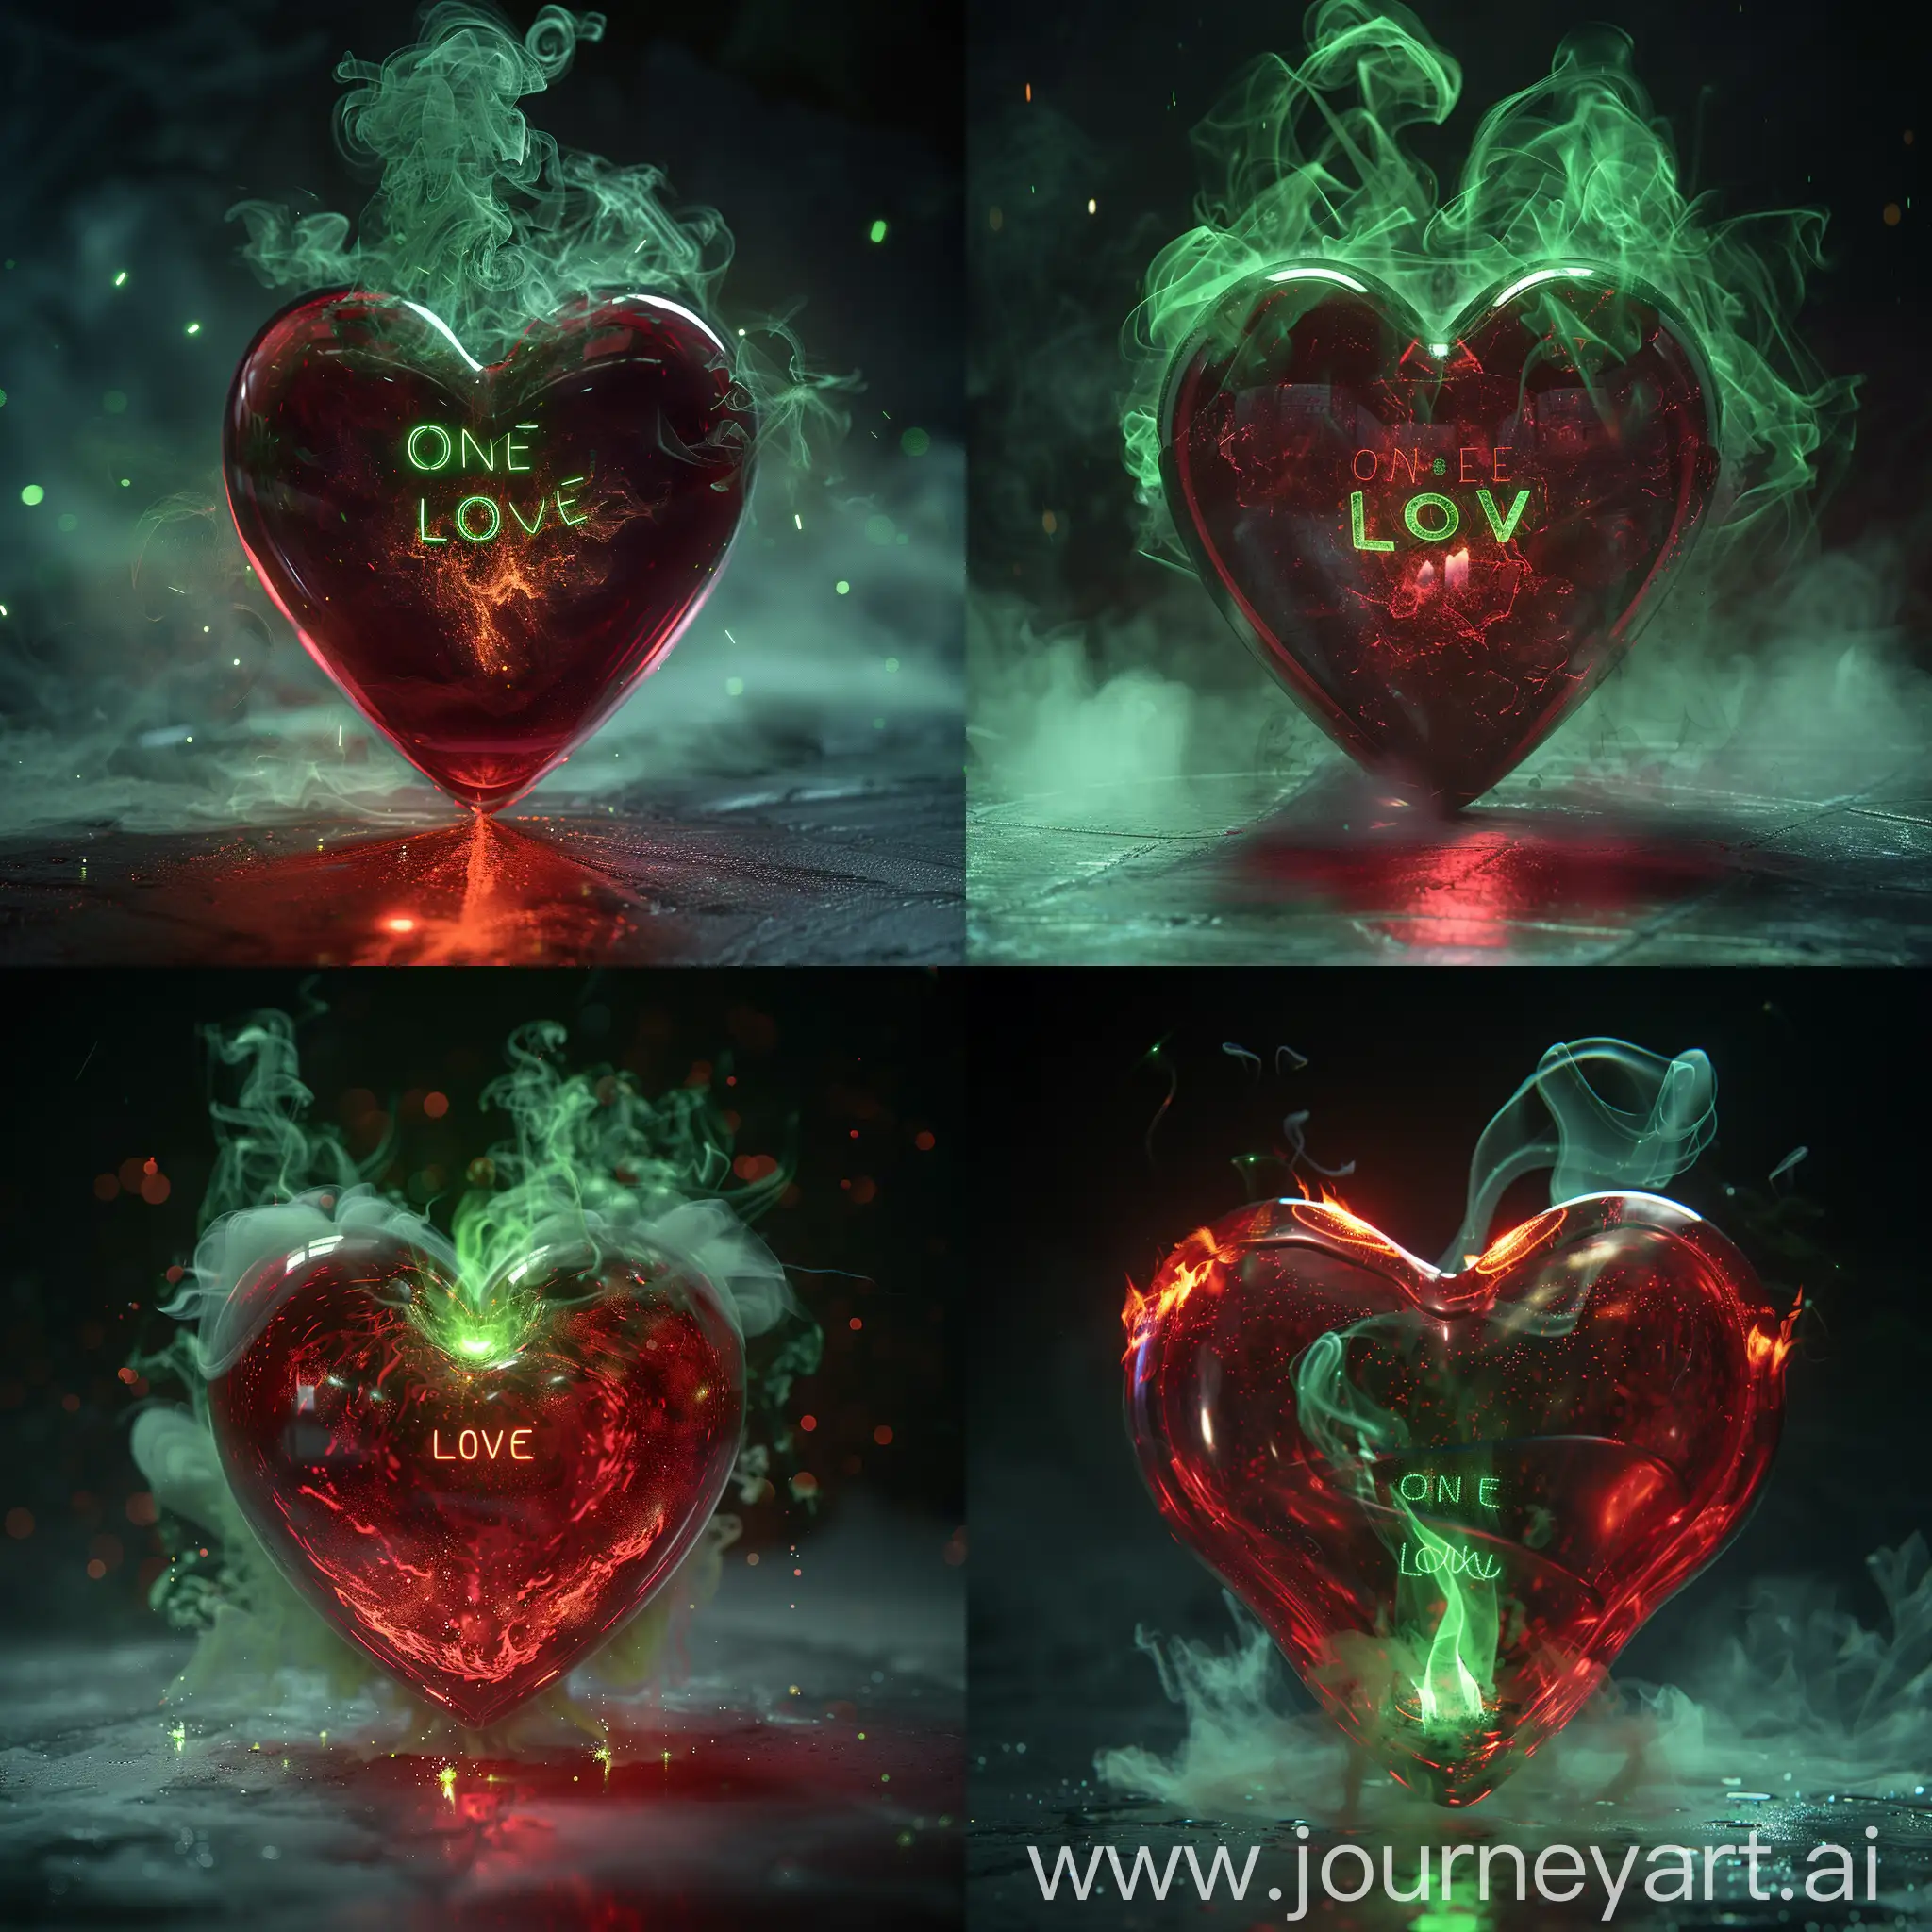 On a dark background, a red glass transparent heart burns with a bright ghostly green flame, spreading ghostly green smoke and green light around, a laser engraving with the text "ONE LOVE" flickers inside the heart --s 250